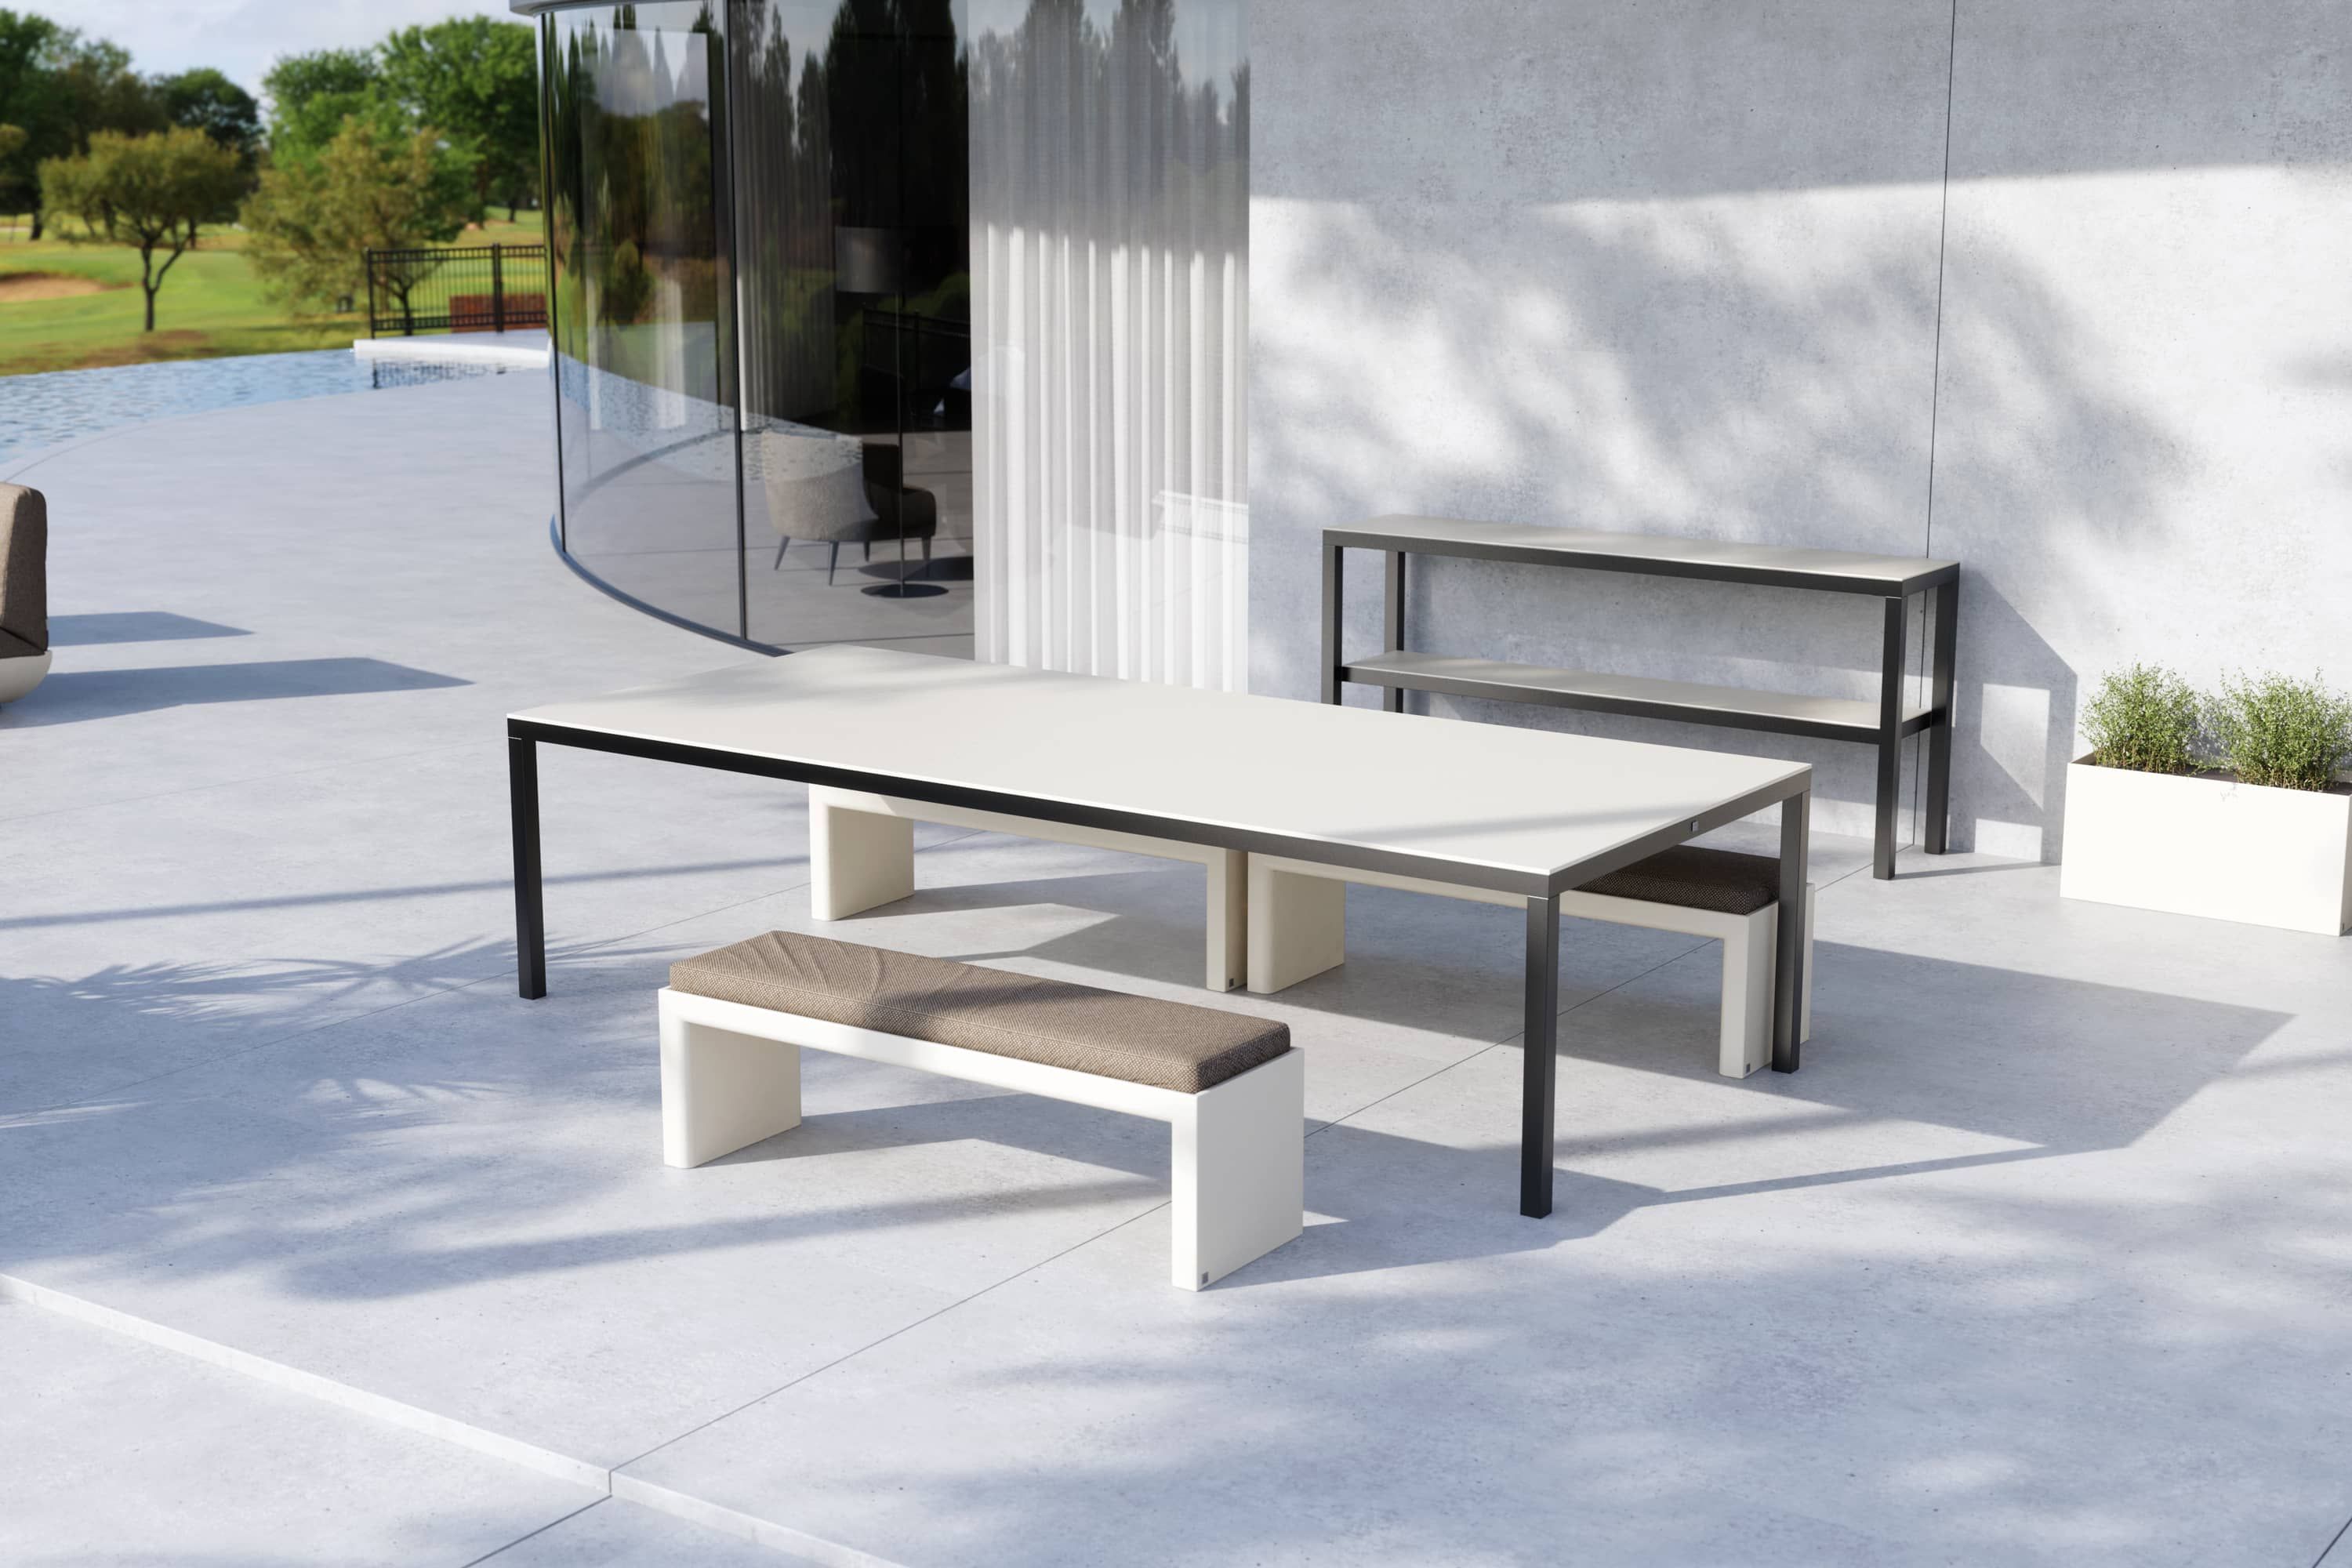 Sierra dining table for outdoor and Quadra benches with cushion